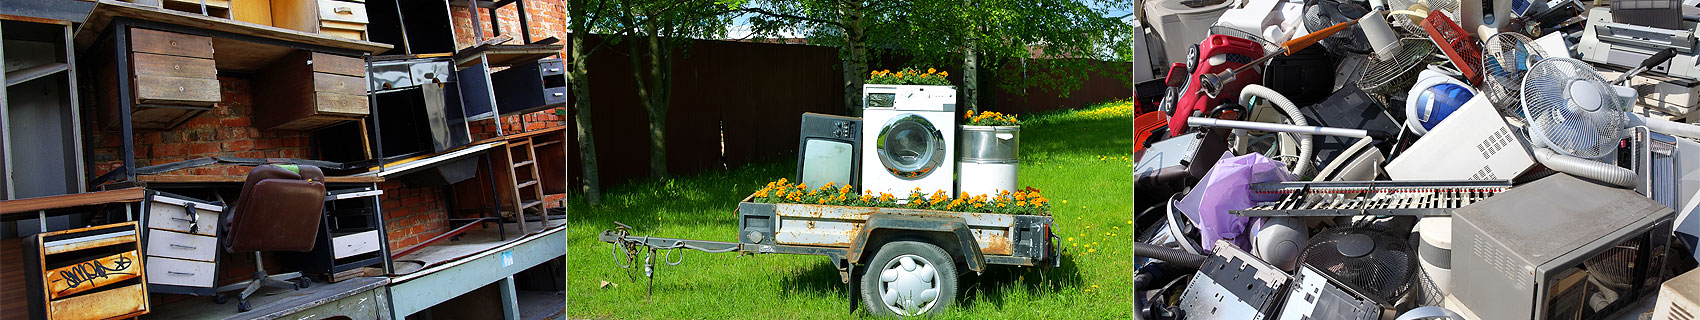 junk removal service in edmonton for furniture removal, landscaping debris, appliances and other household items